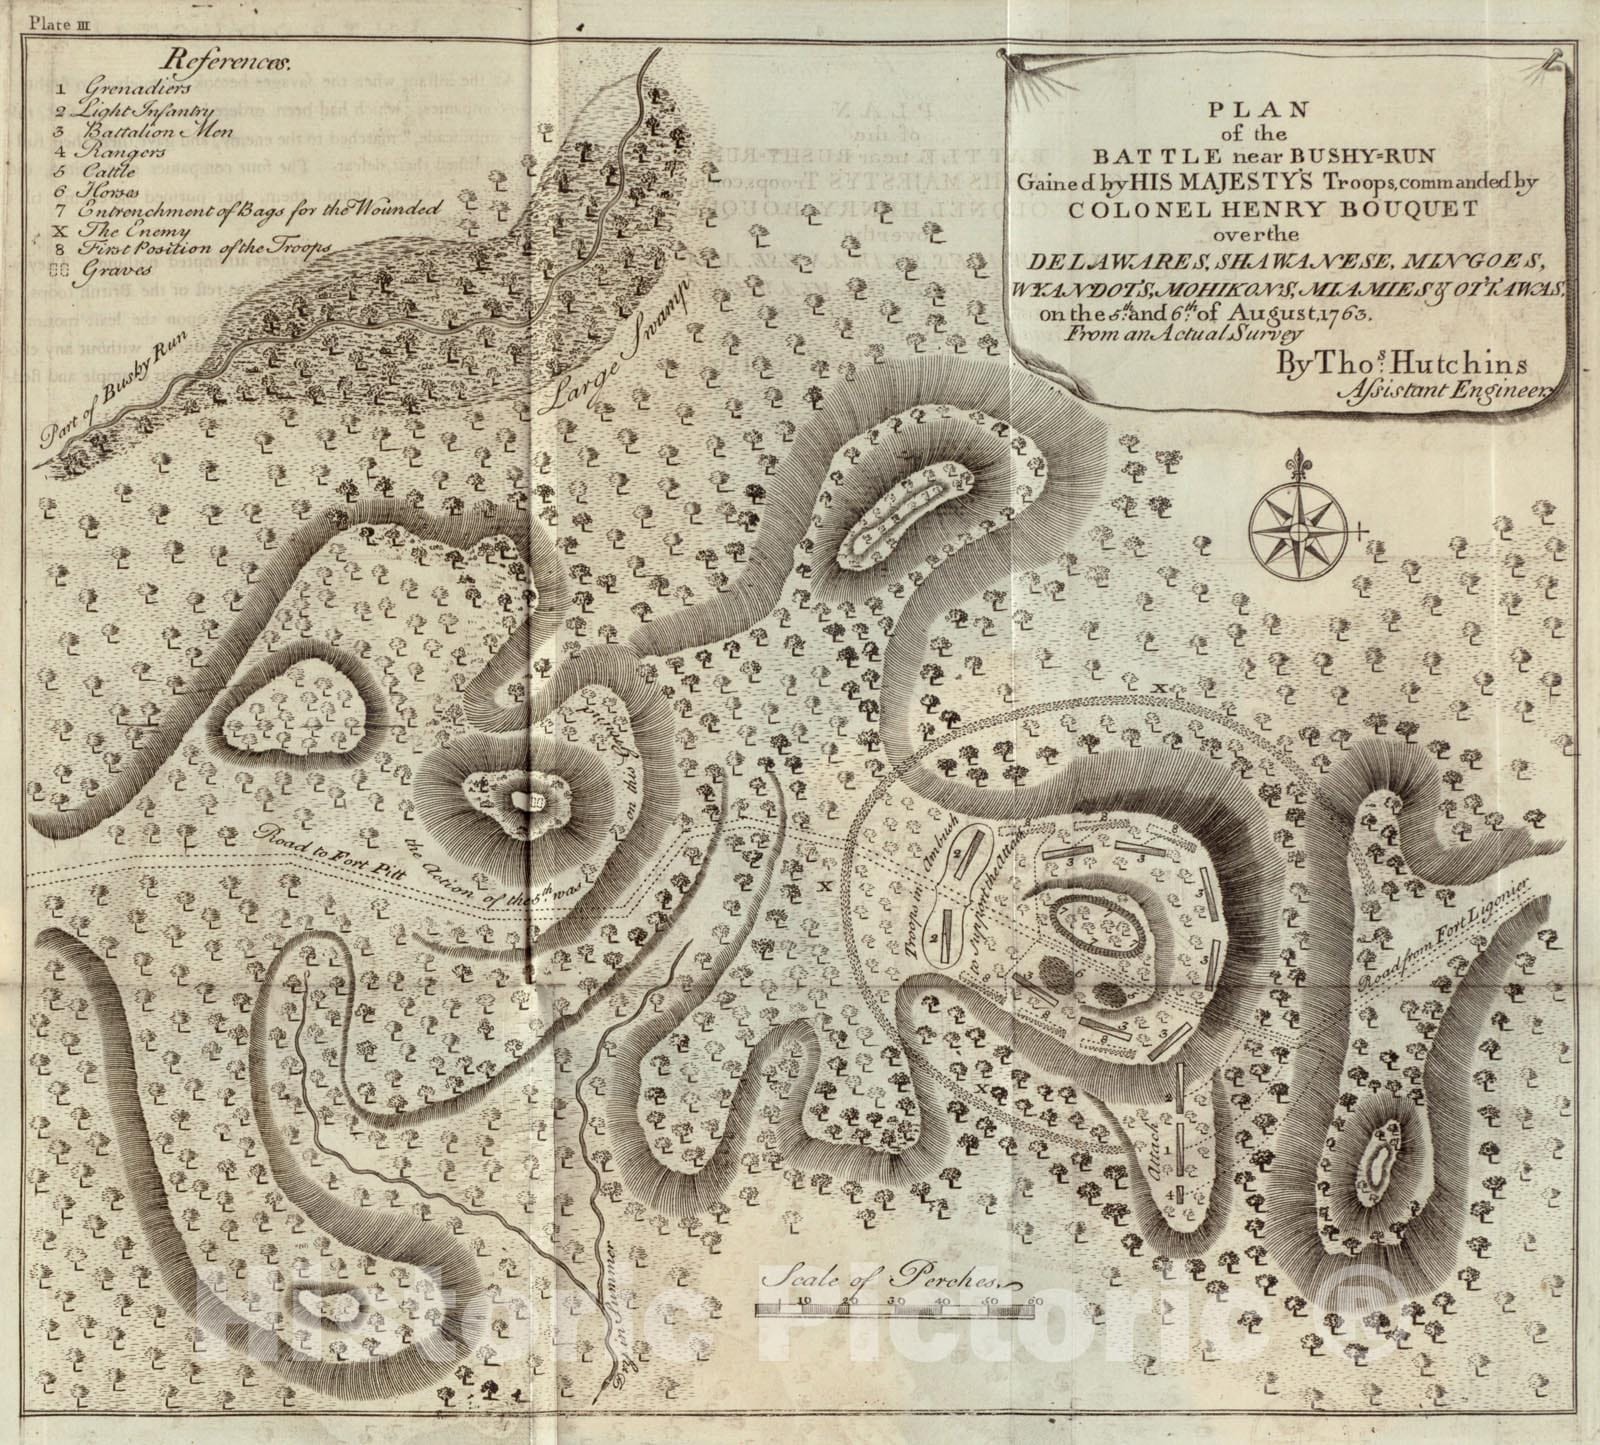 Historical Map, Plan of The Battle Near Bushy-Run gained by His Majesty's Troops commanded by Colonel Henry Bouquet Over The Delawares, Shawanese, Mingoes, Wyandots, Vintage Wall Art